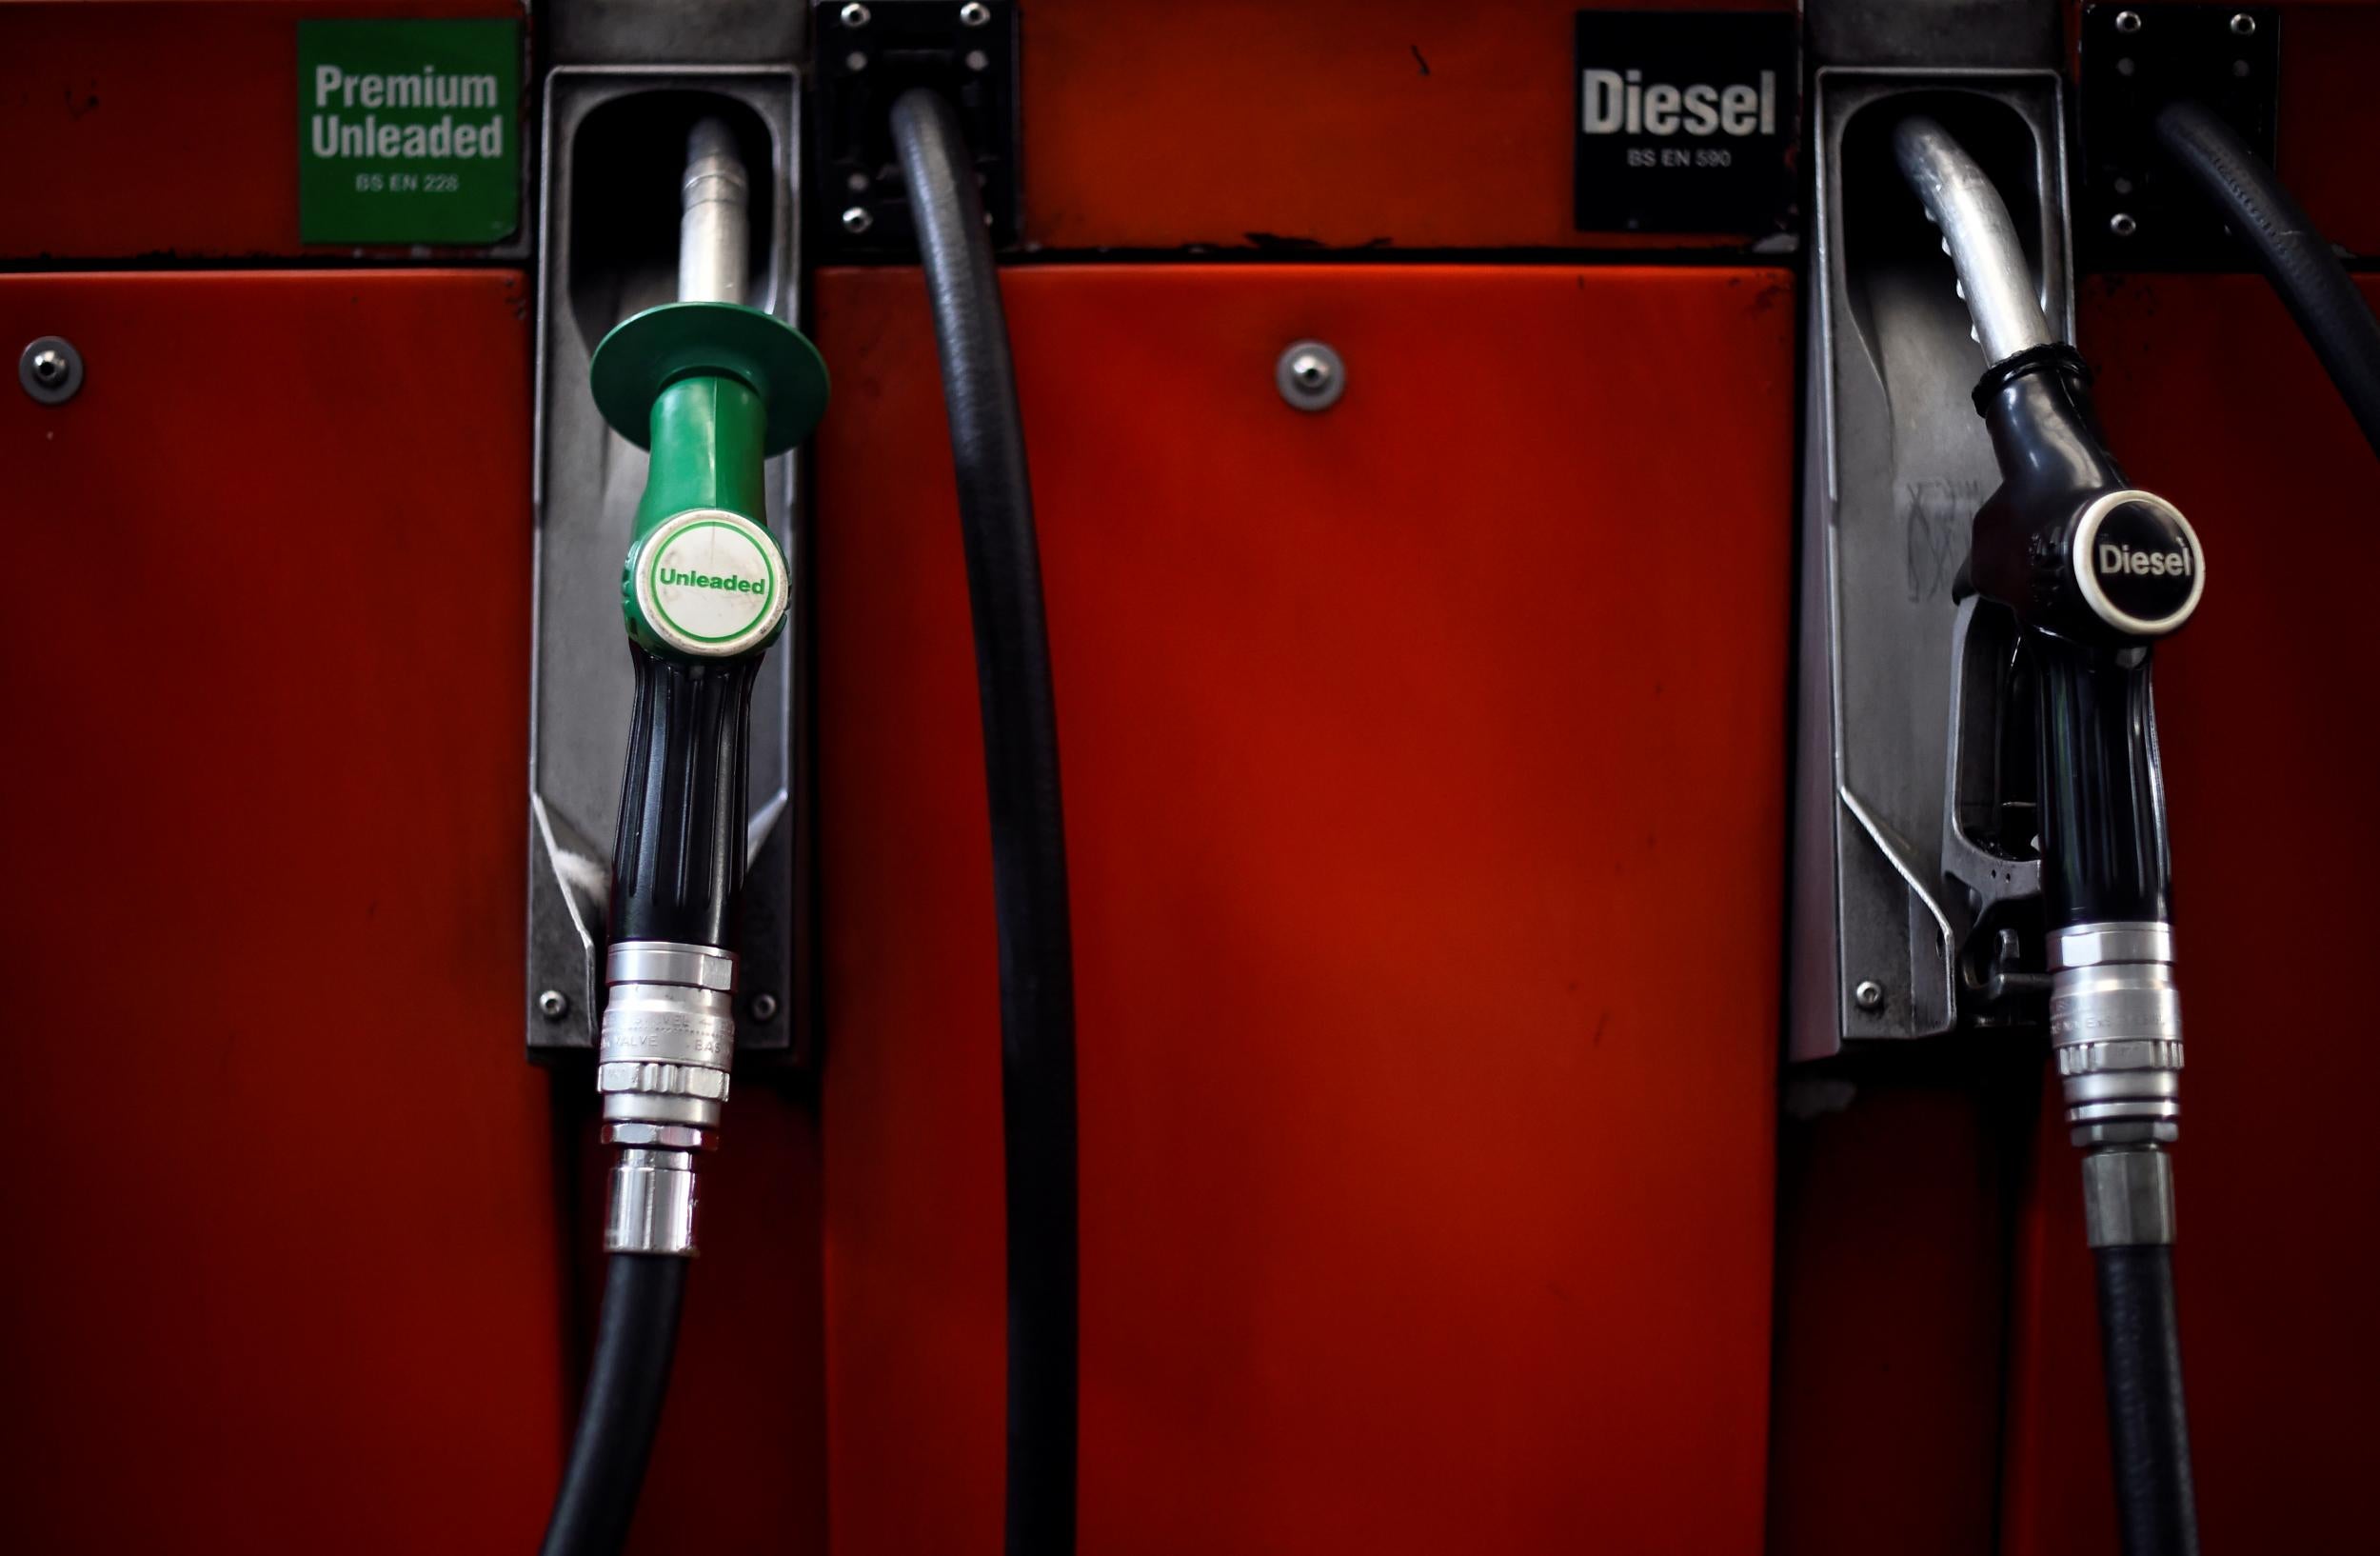 The average petrol price rose to 129.37p per litre over the weekend